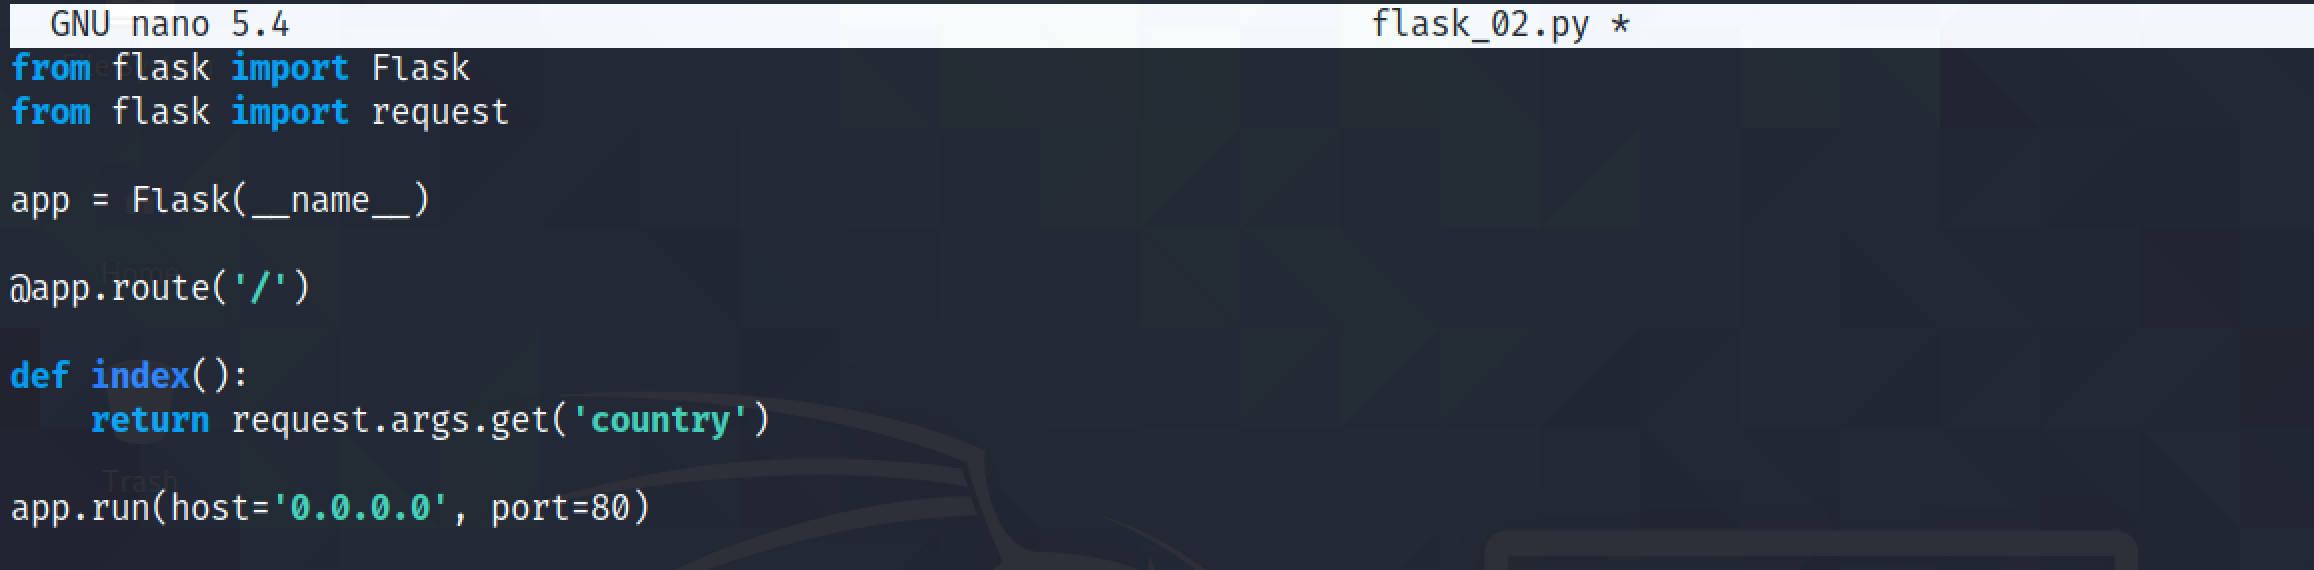 Flask proxy server script to read the country parameter.